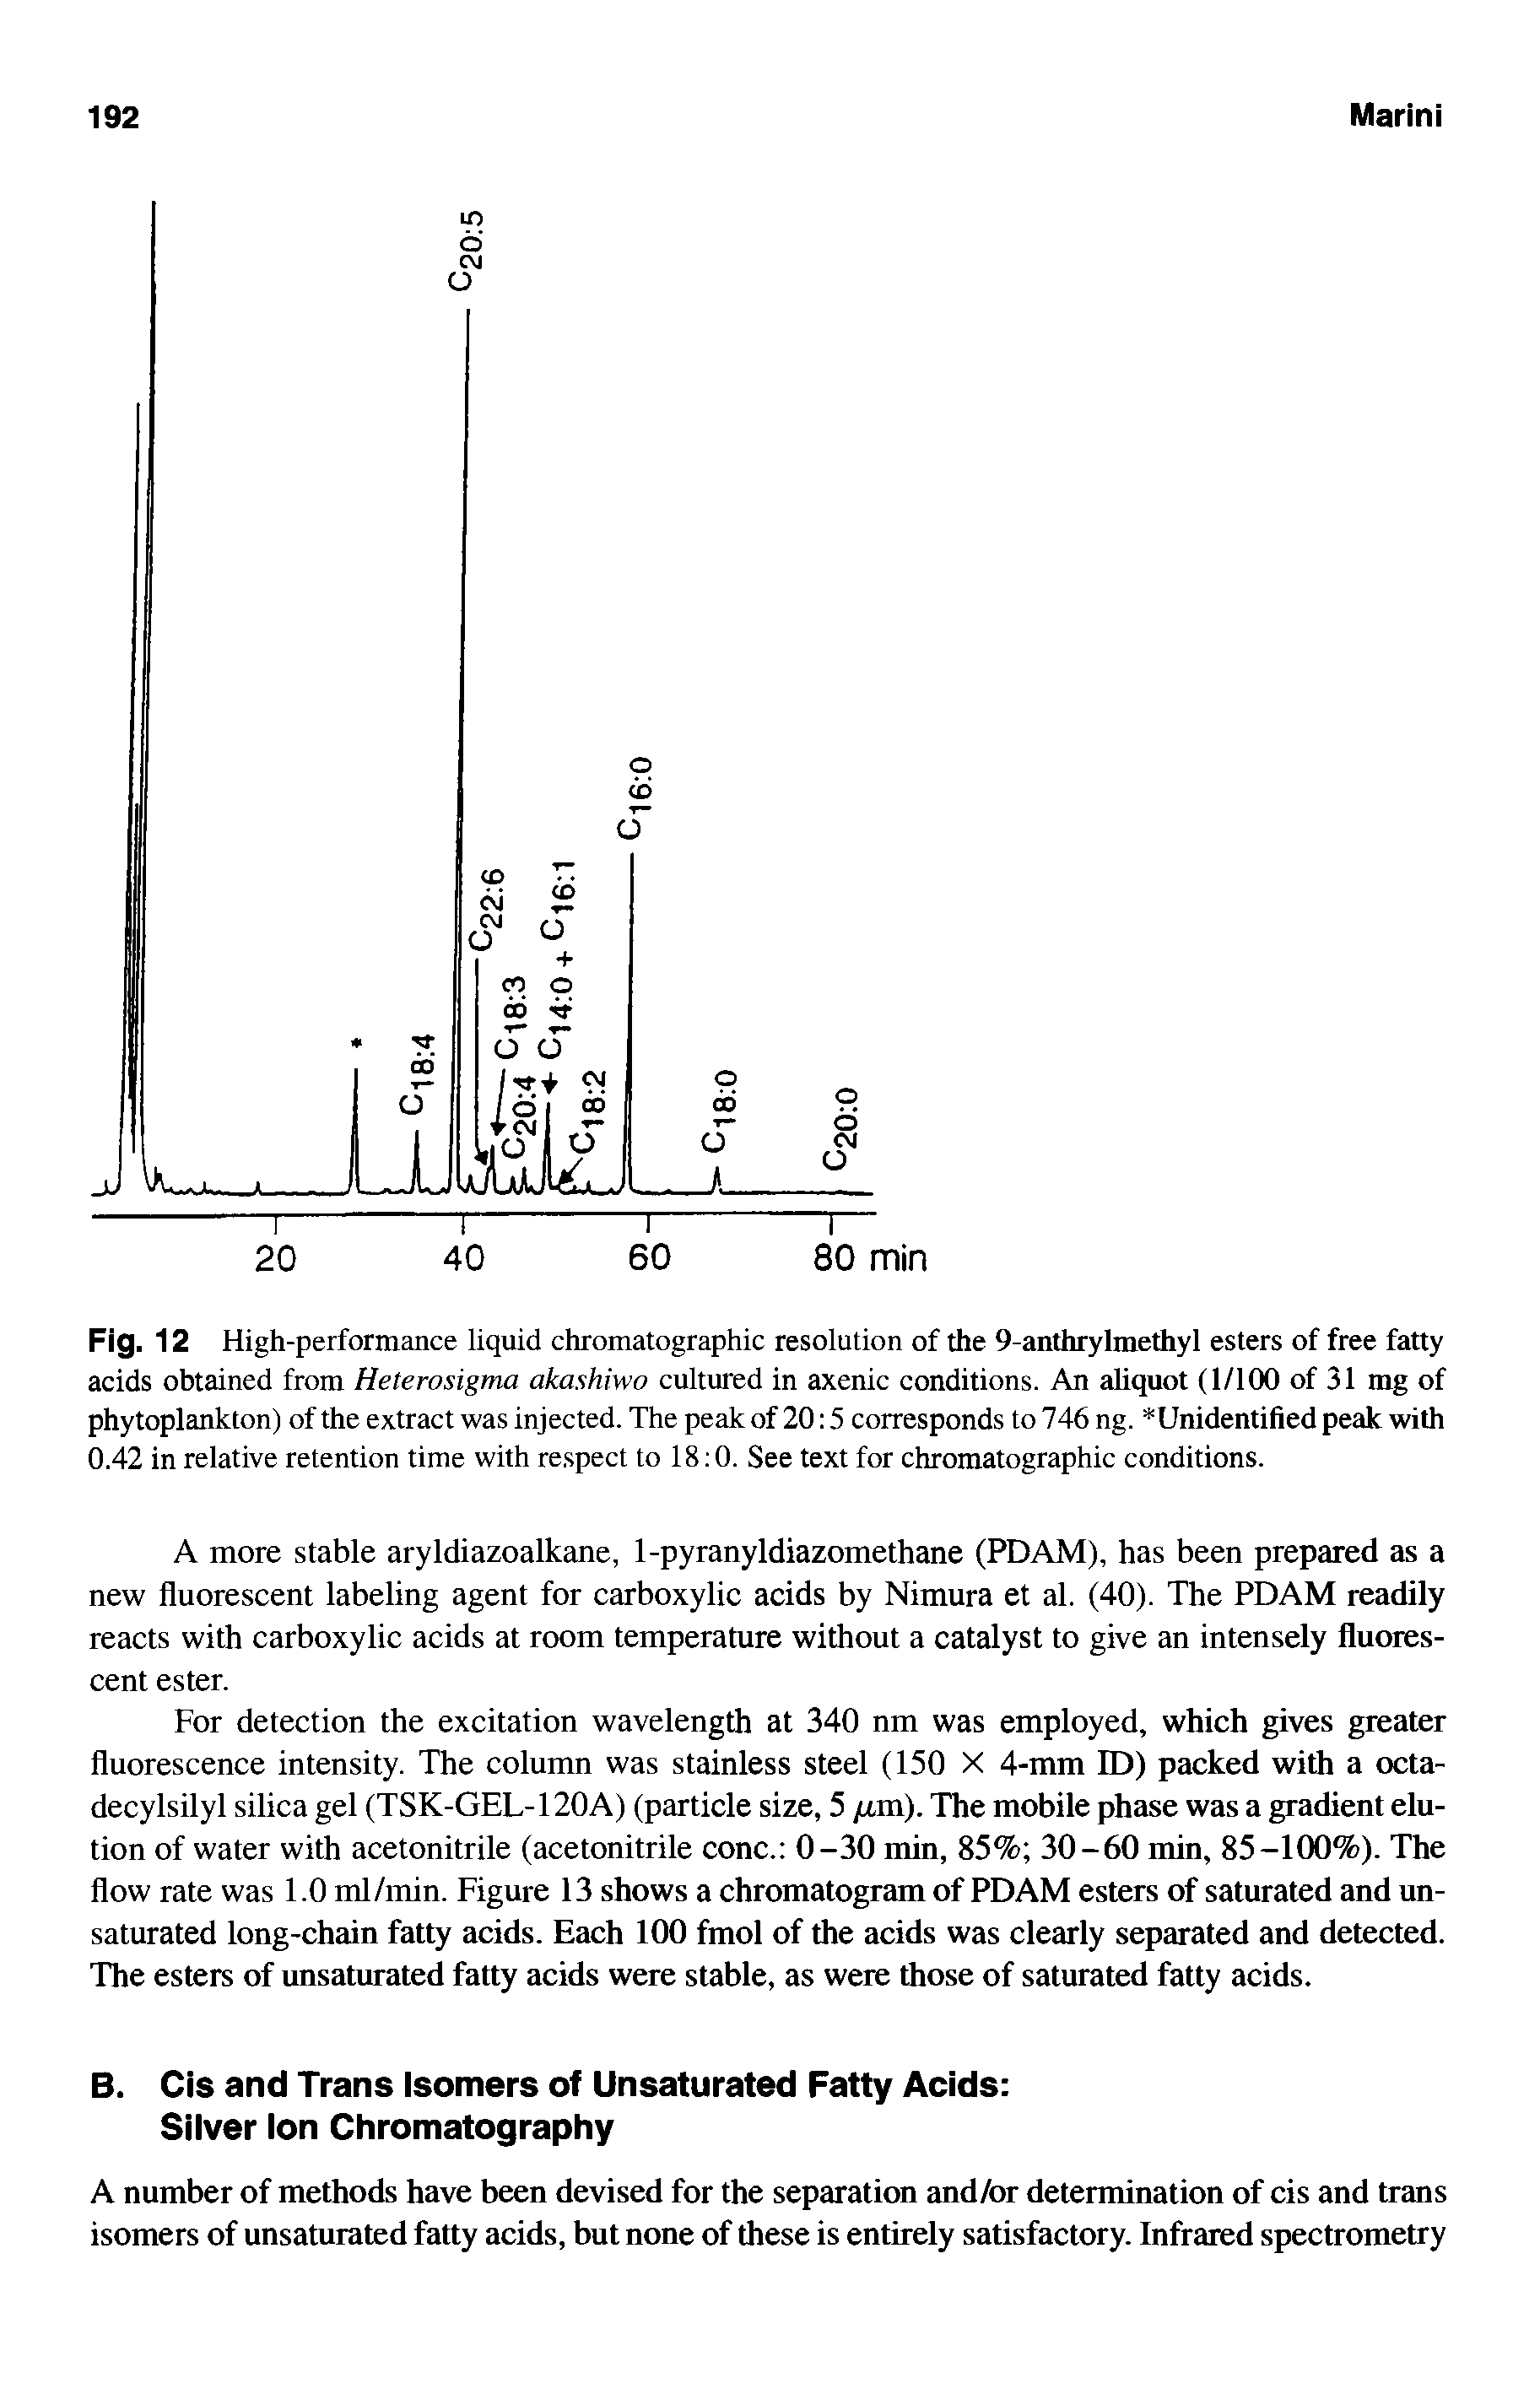 Fig. 12 High-performance liquid chromatographic resolution of the 9-anthrylmethyl esters of free fatty acids obtained from Heterosigma akashiwo cultured in axenic conditions. An aliquot (1/100 of 31 mg of phytoplankton) of the extract was injected. The peak of 20 5 corresponds to 746 ng. Unidentified peak with 0.42 in relative retention time with respect to 18 0. See text for chromatographic conditions.